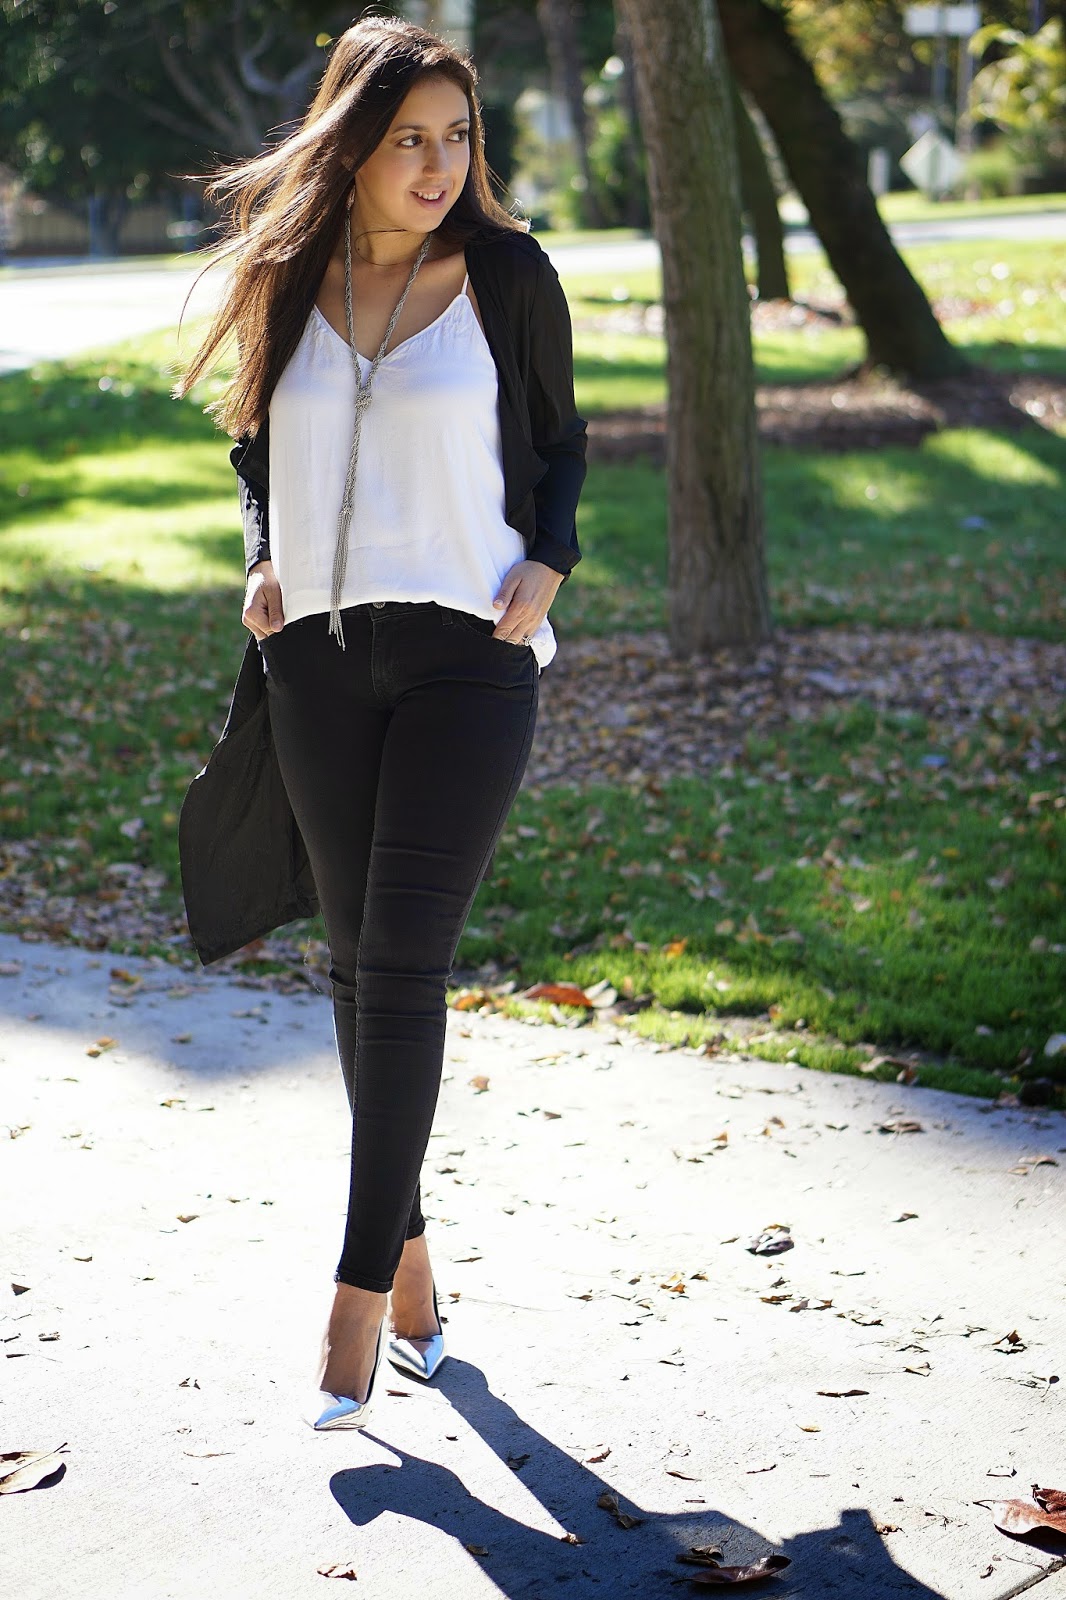 Latina Fashion Blogger, Fashion Blogger, Zara metallic heels, Zara Silver Pumps, Black Levis Jeggings, JCPenney, Levis Jeans, Mango White Top, Foreign Exchange Cardigan, Black Trench Coat, White and Black Outfit,